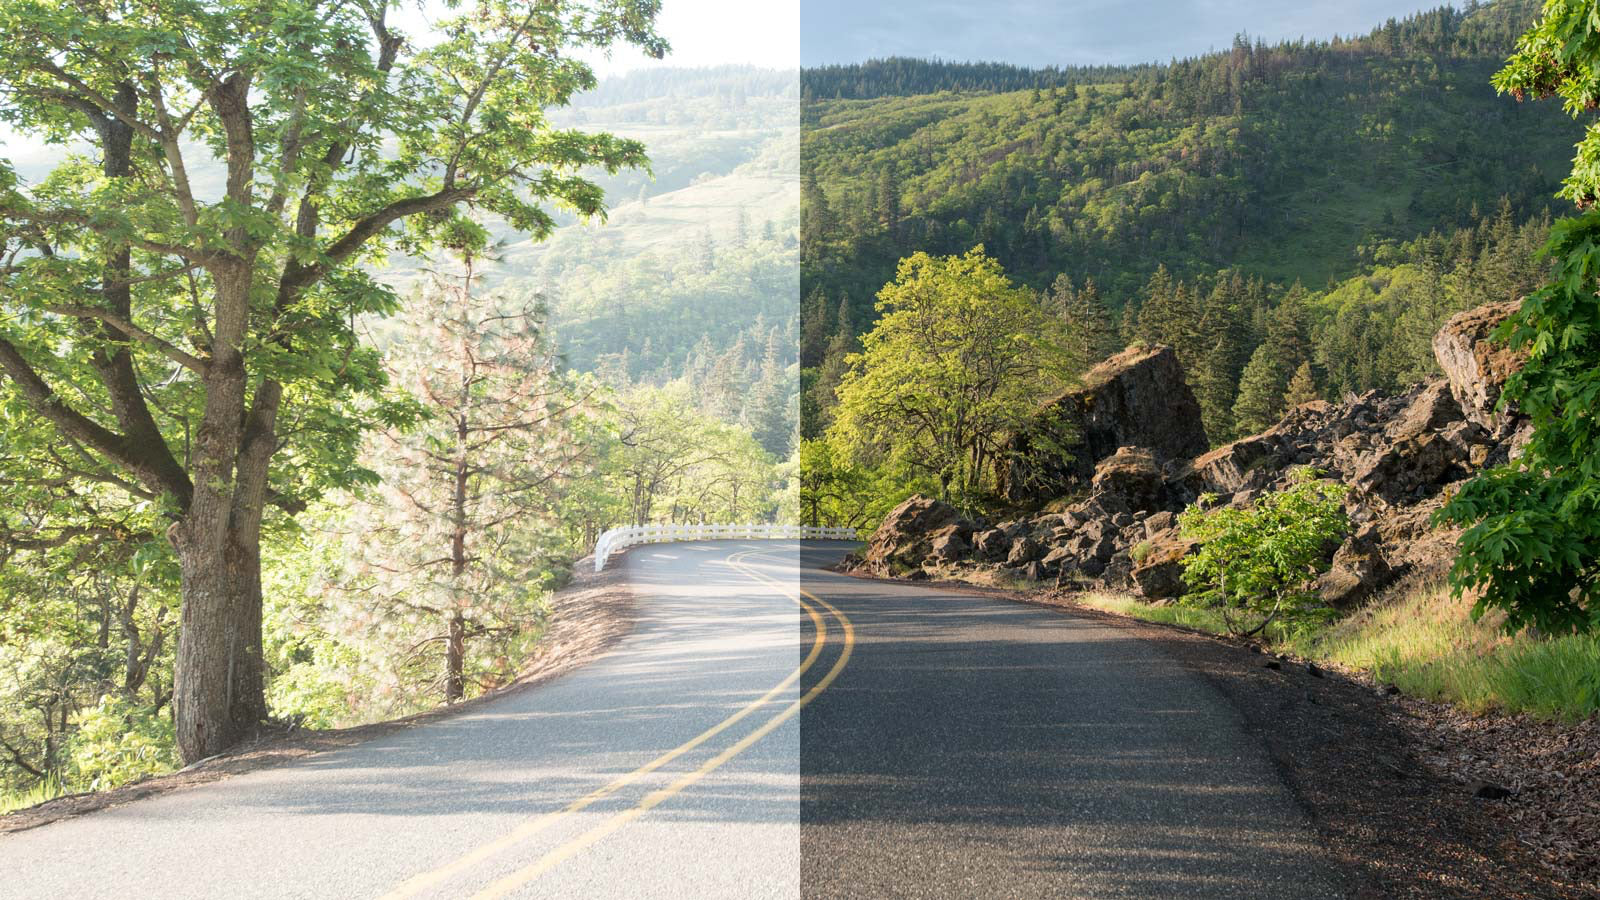 View of the road seen with and without the Stealth Black lens